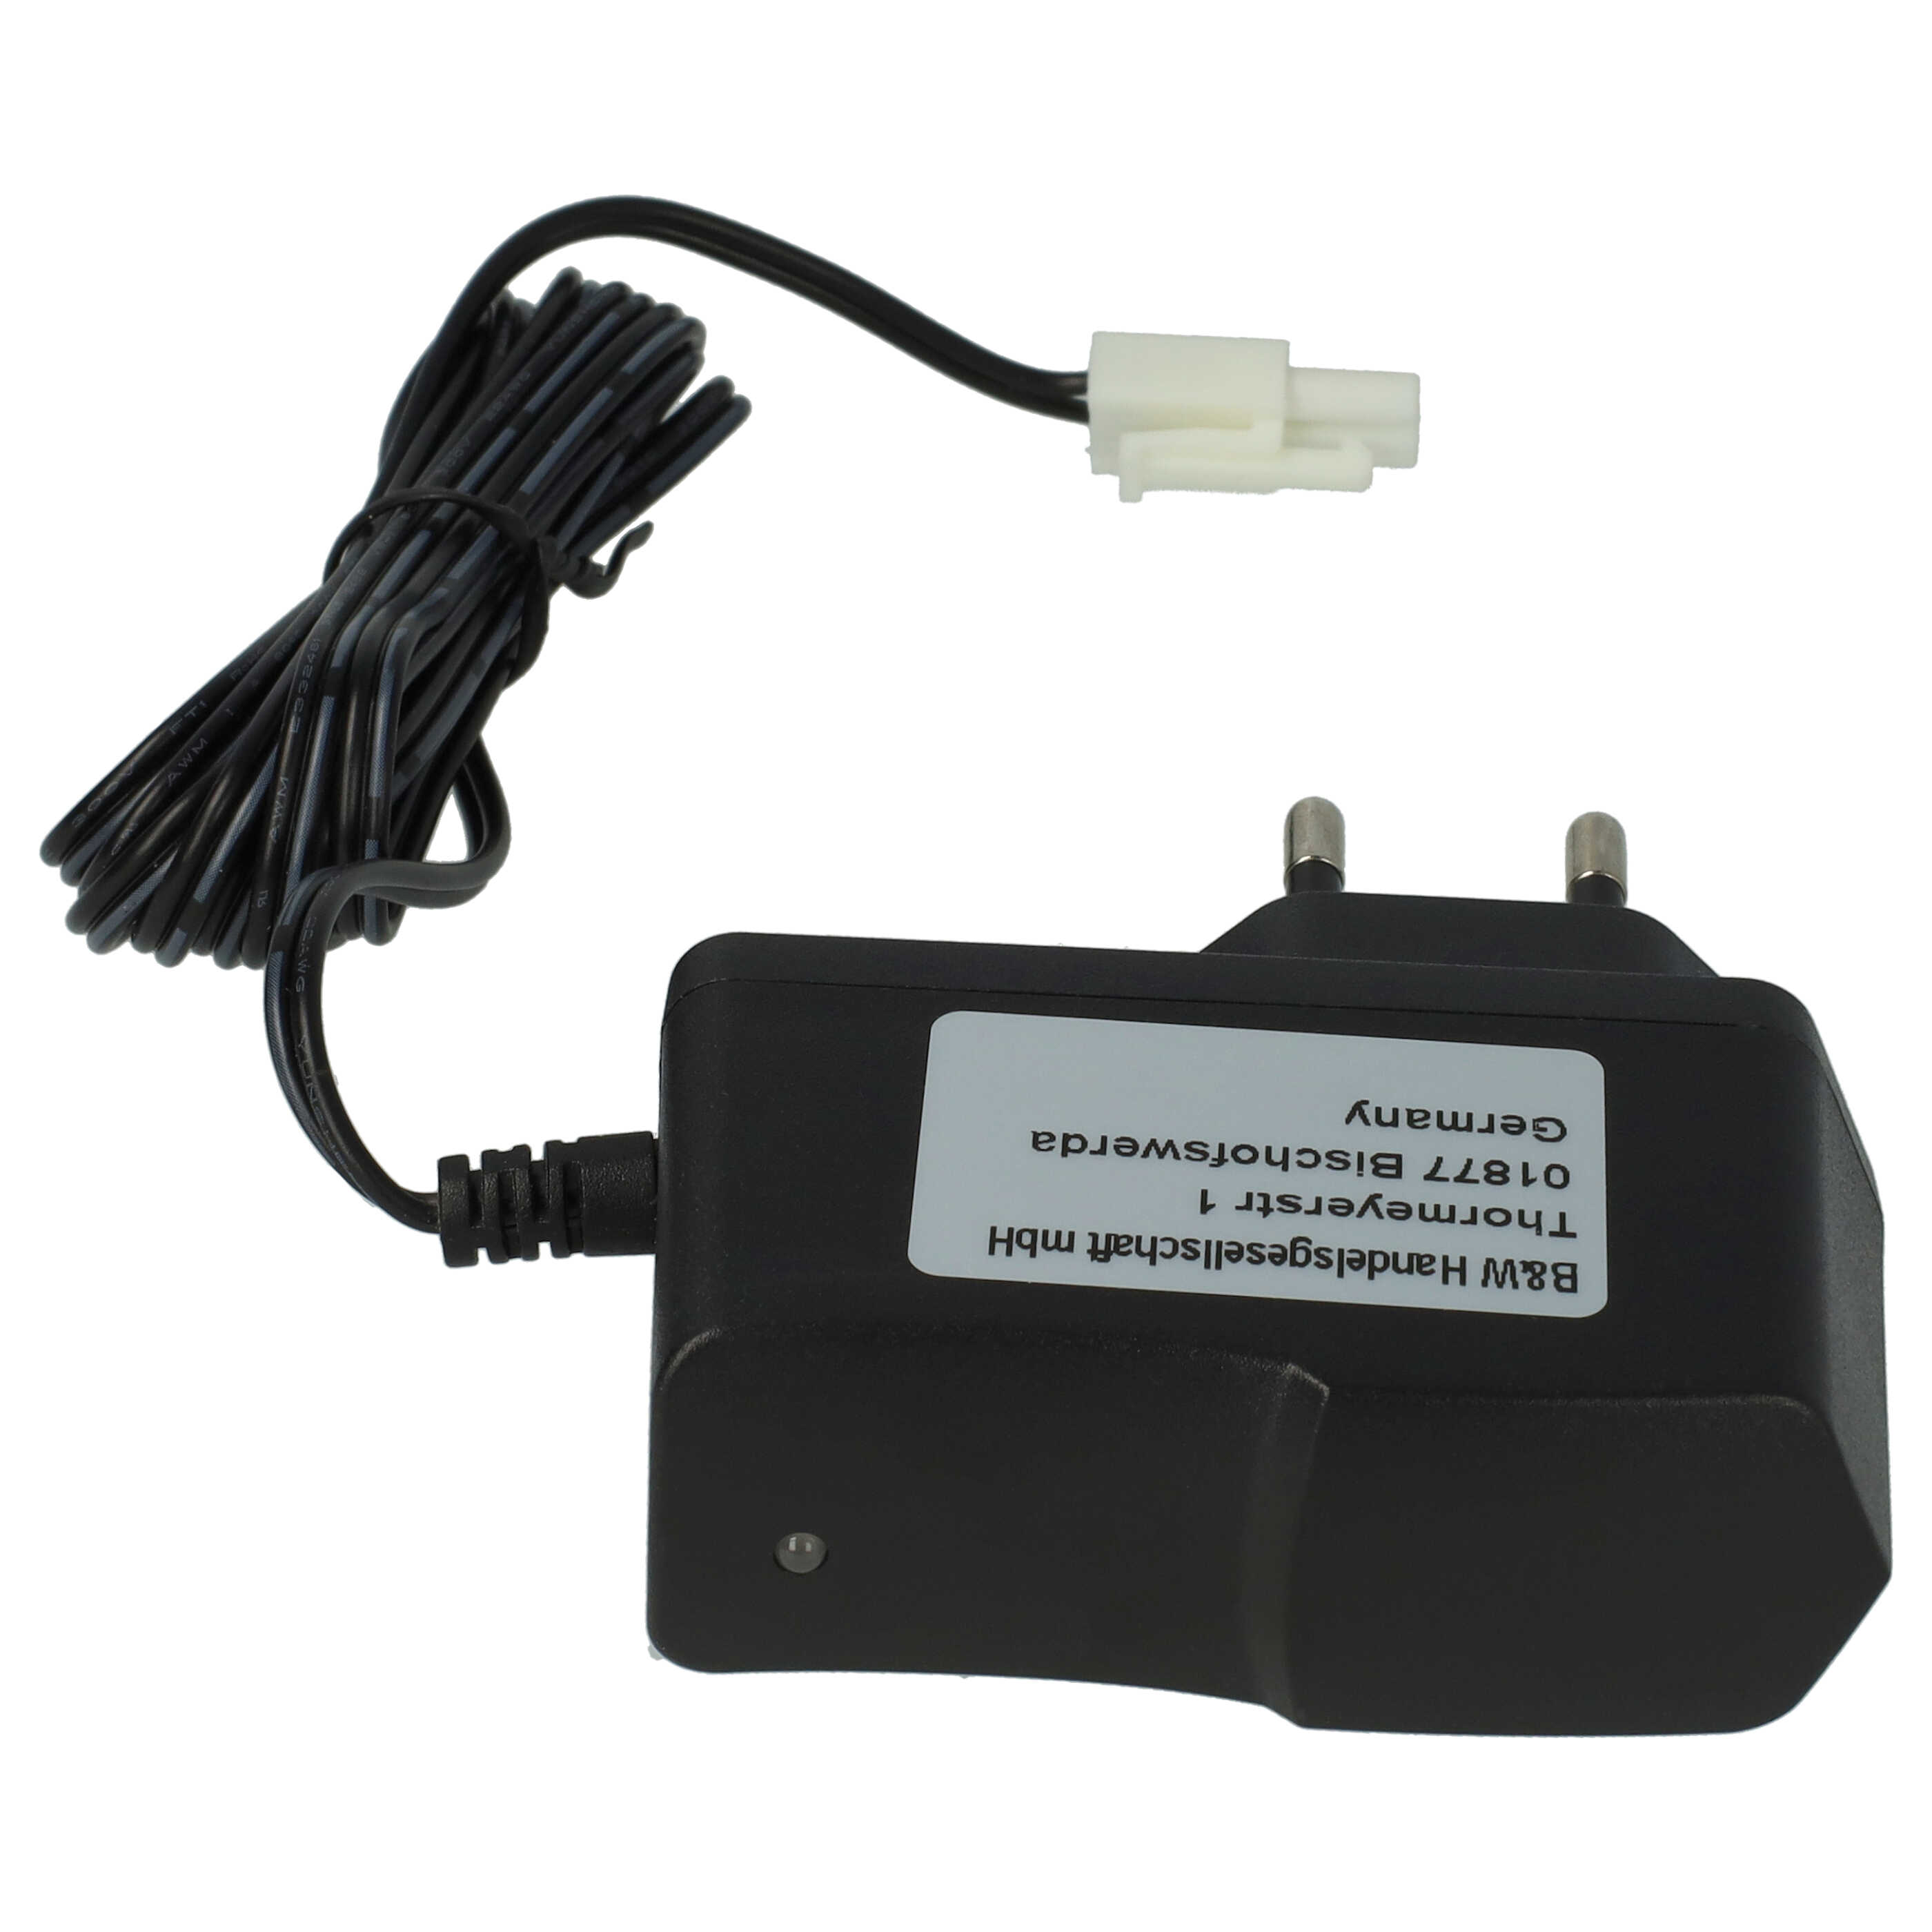 Charger suitable for RC Batteries with Tamiya Connector, RC Model Making Battery Packs - 200 cm 6 V / 0.25 A